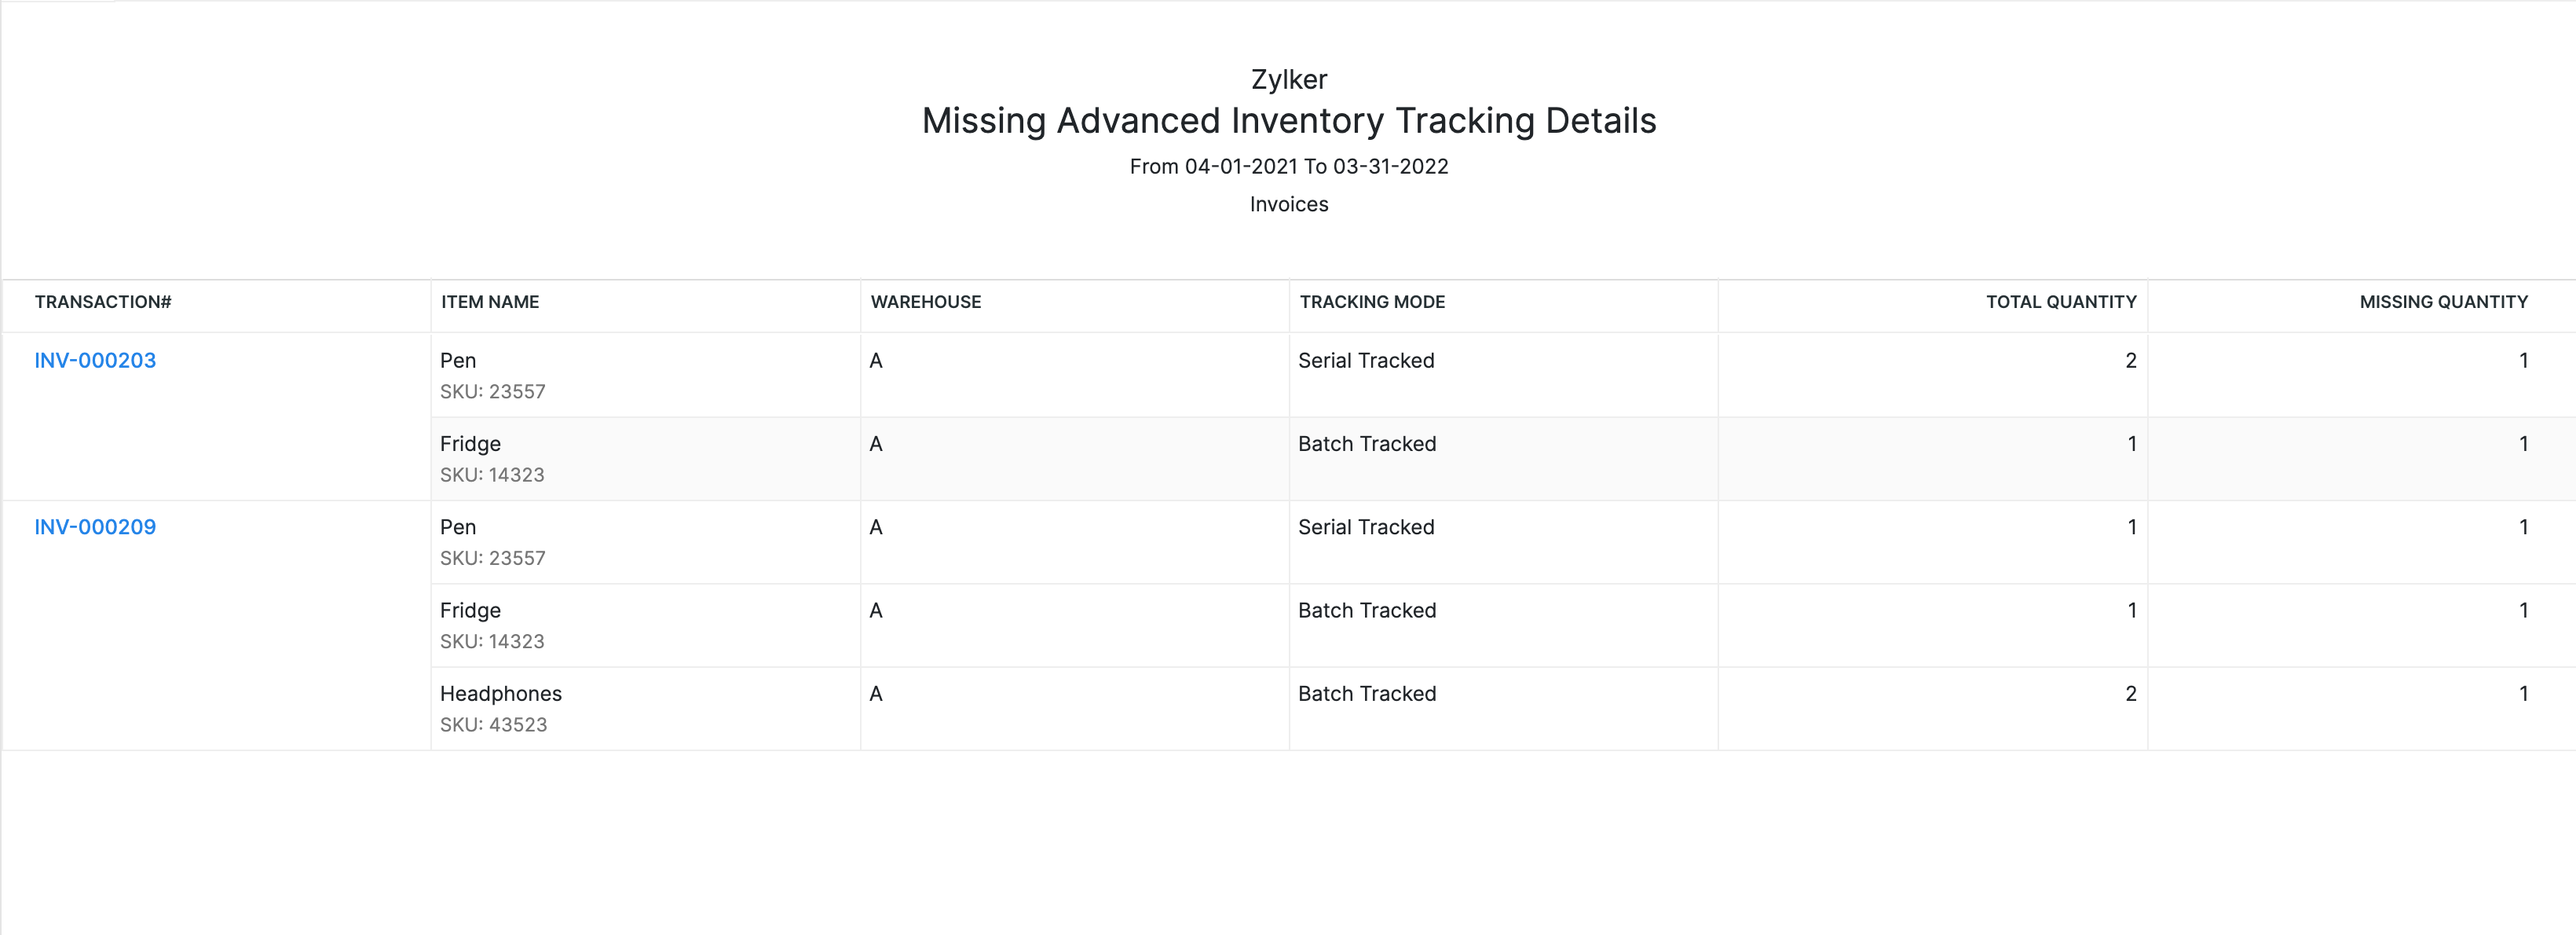 Missing Advanced Inventory Tracking Details